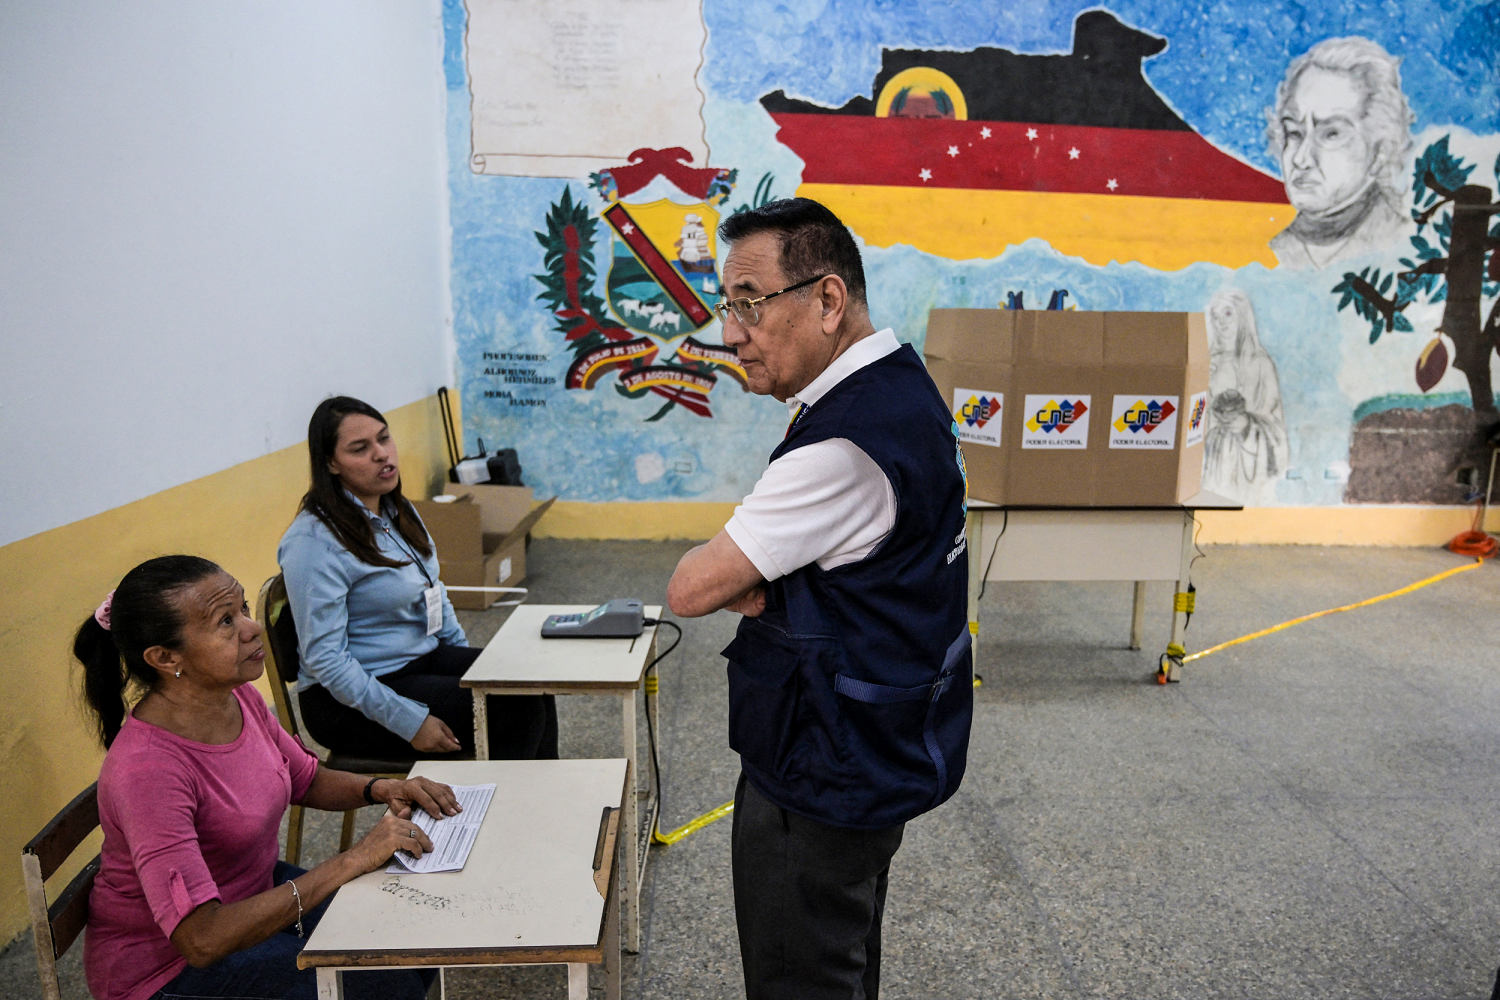 Three things to know about Venezuela's presidential election